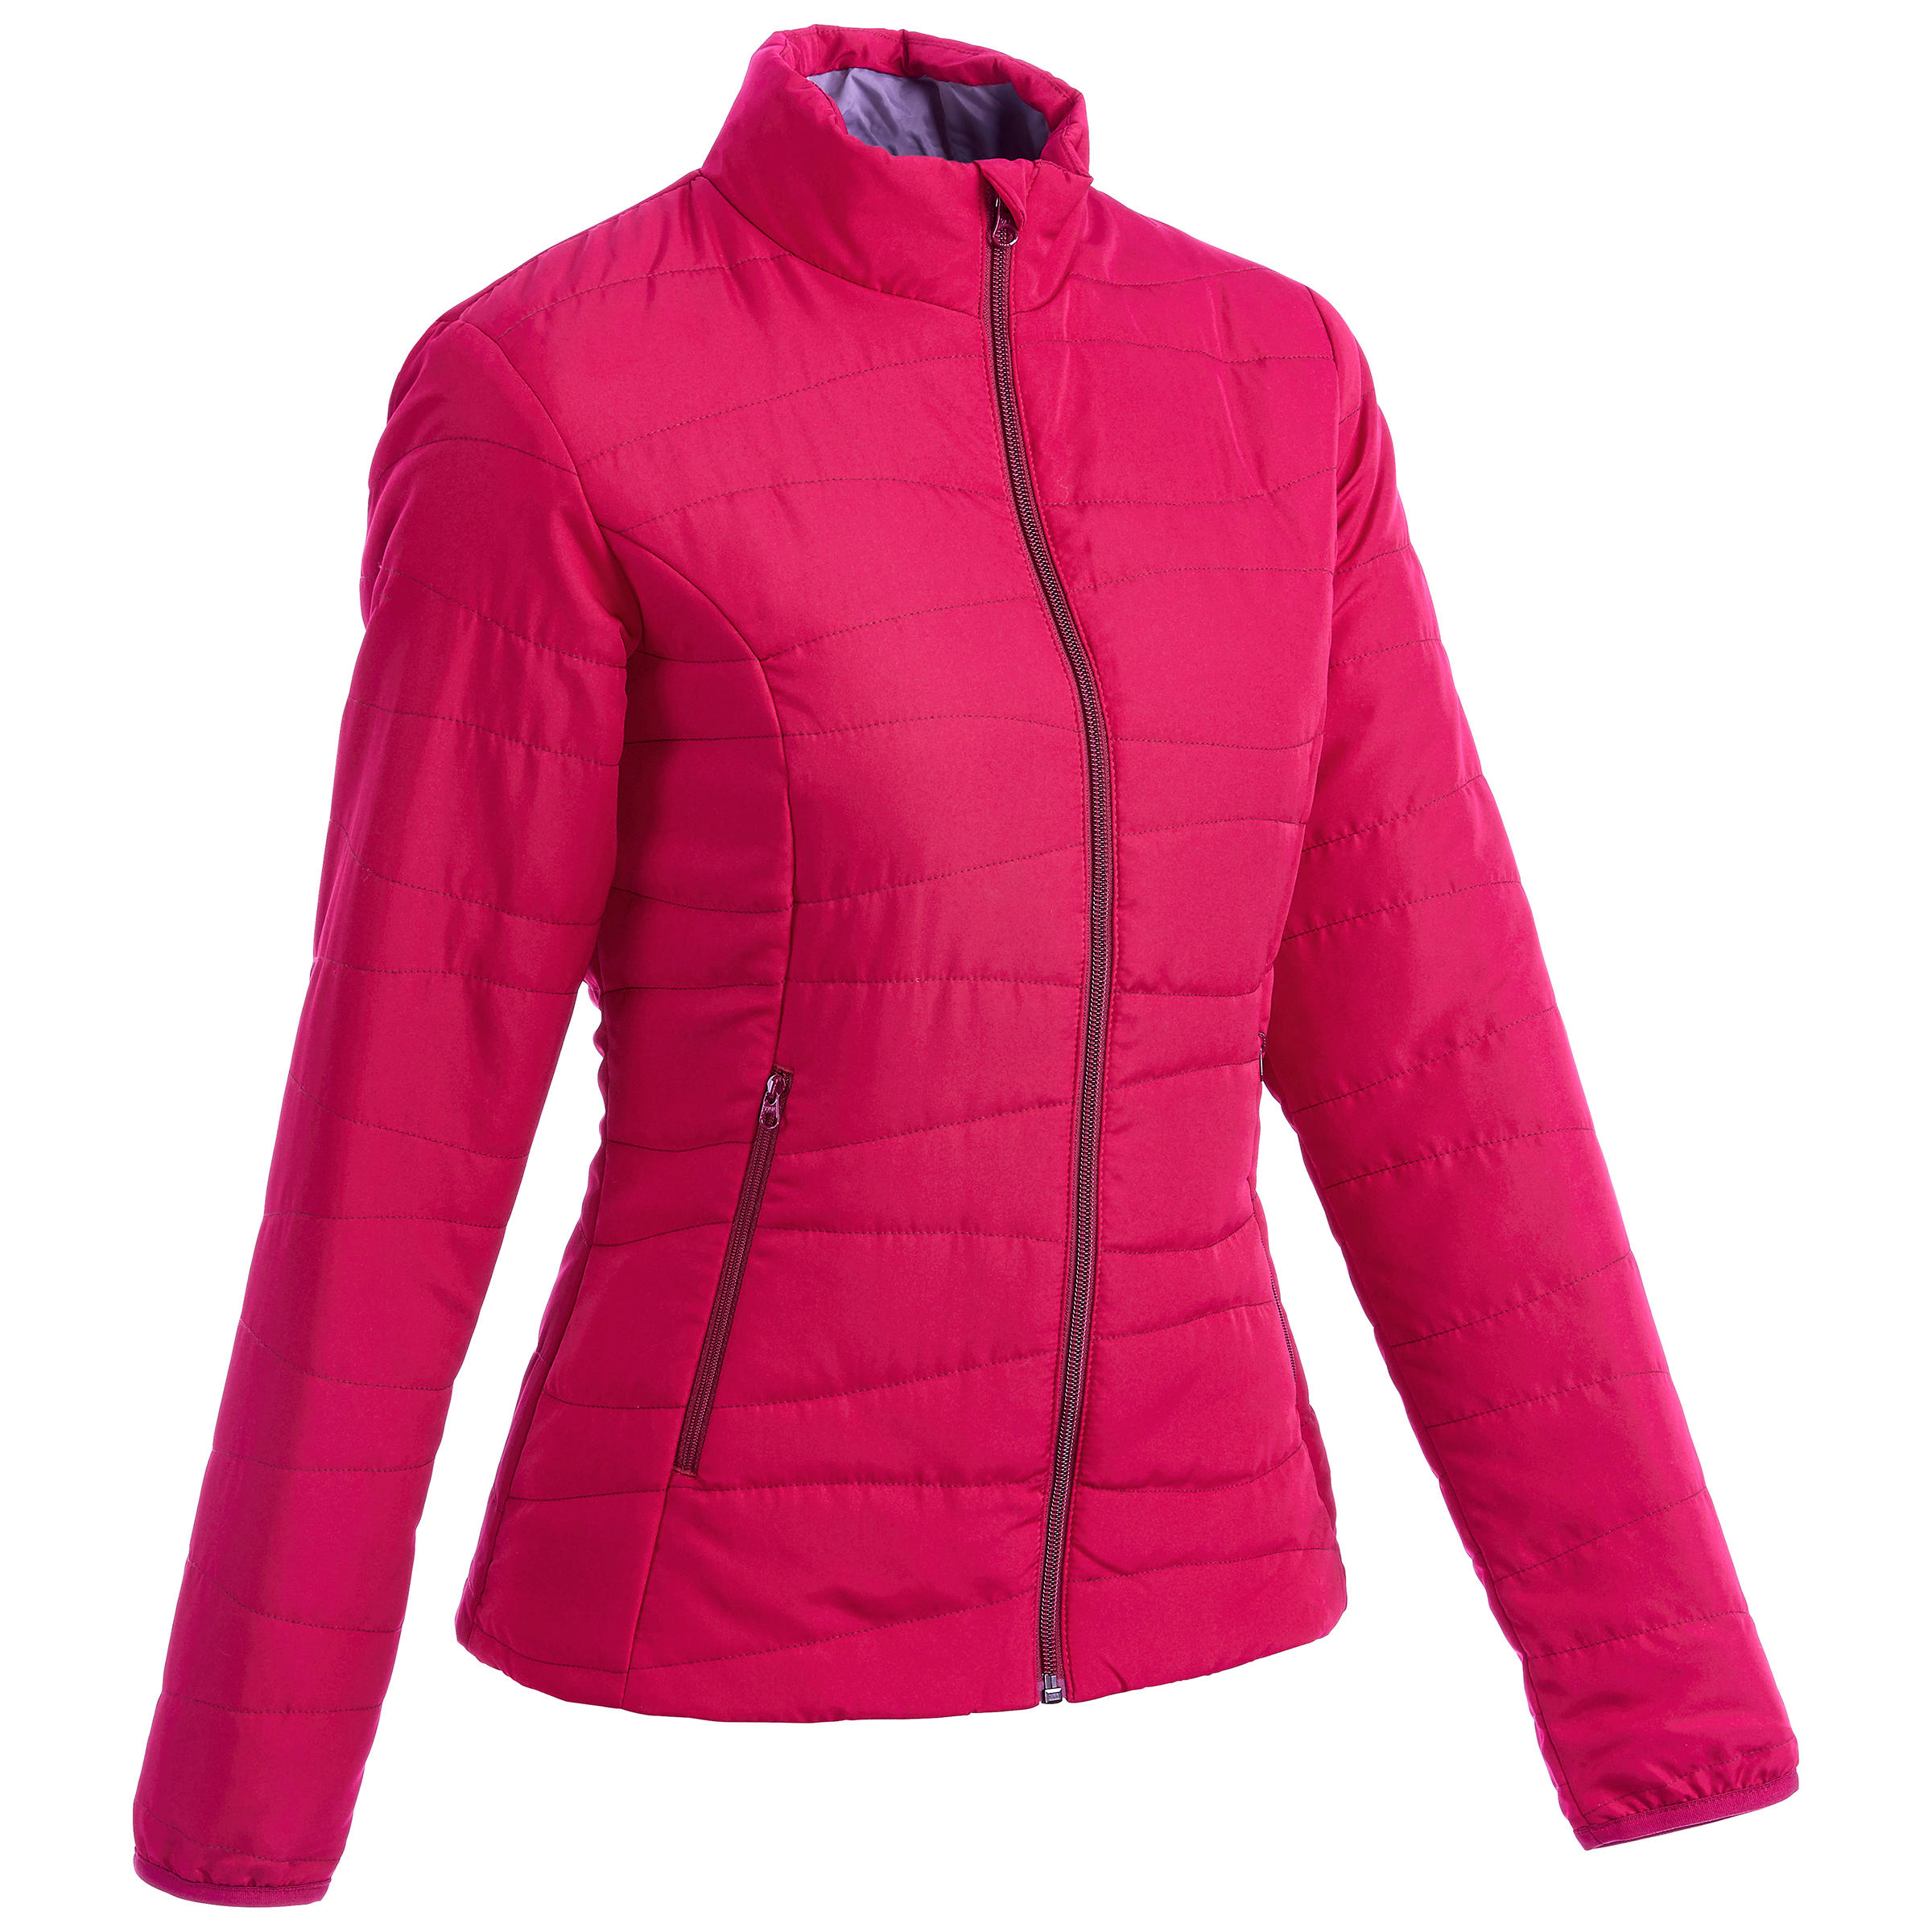 QUECHUA by Decathlon Full Sleeve Solid Girls Jacket - Buy QUECHUA by  Decathlon Full Sleeve Solid Girls Jacket Online at Best Prices in India |  Flipkart.com